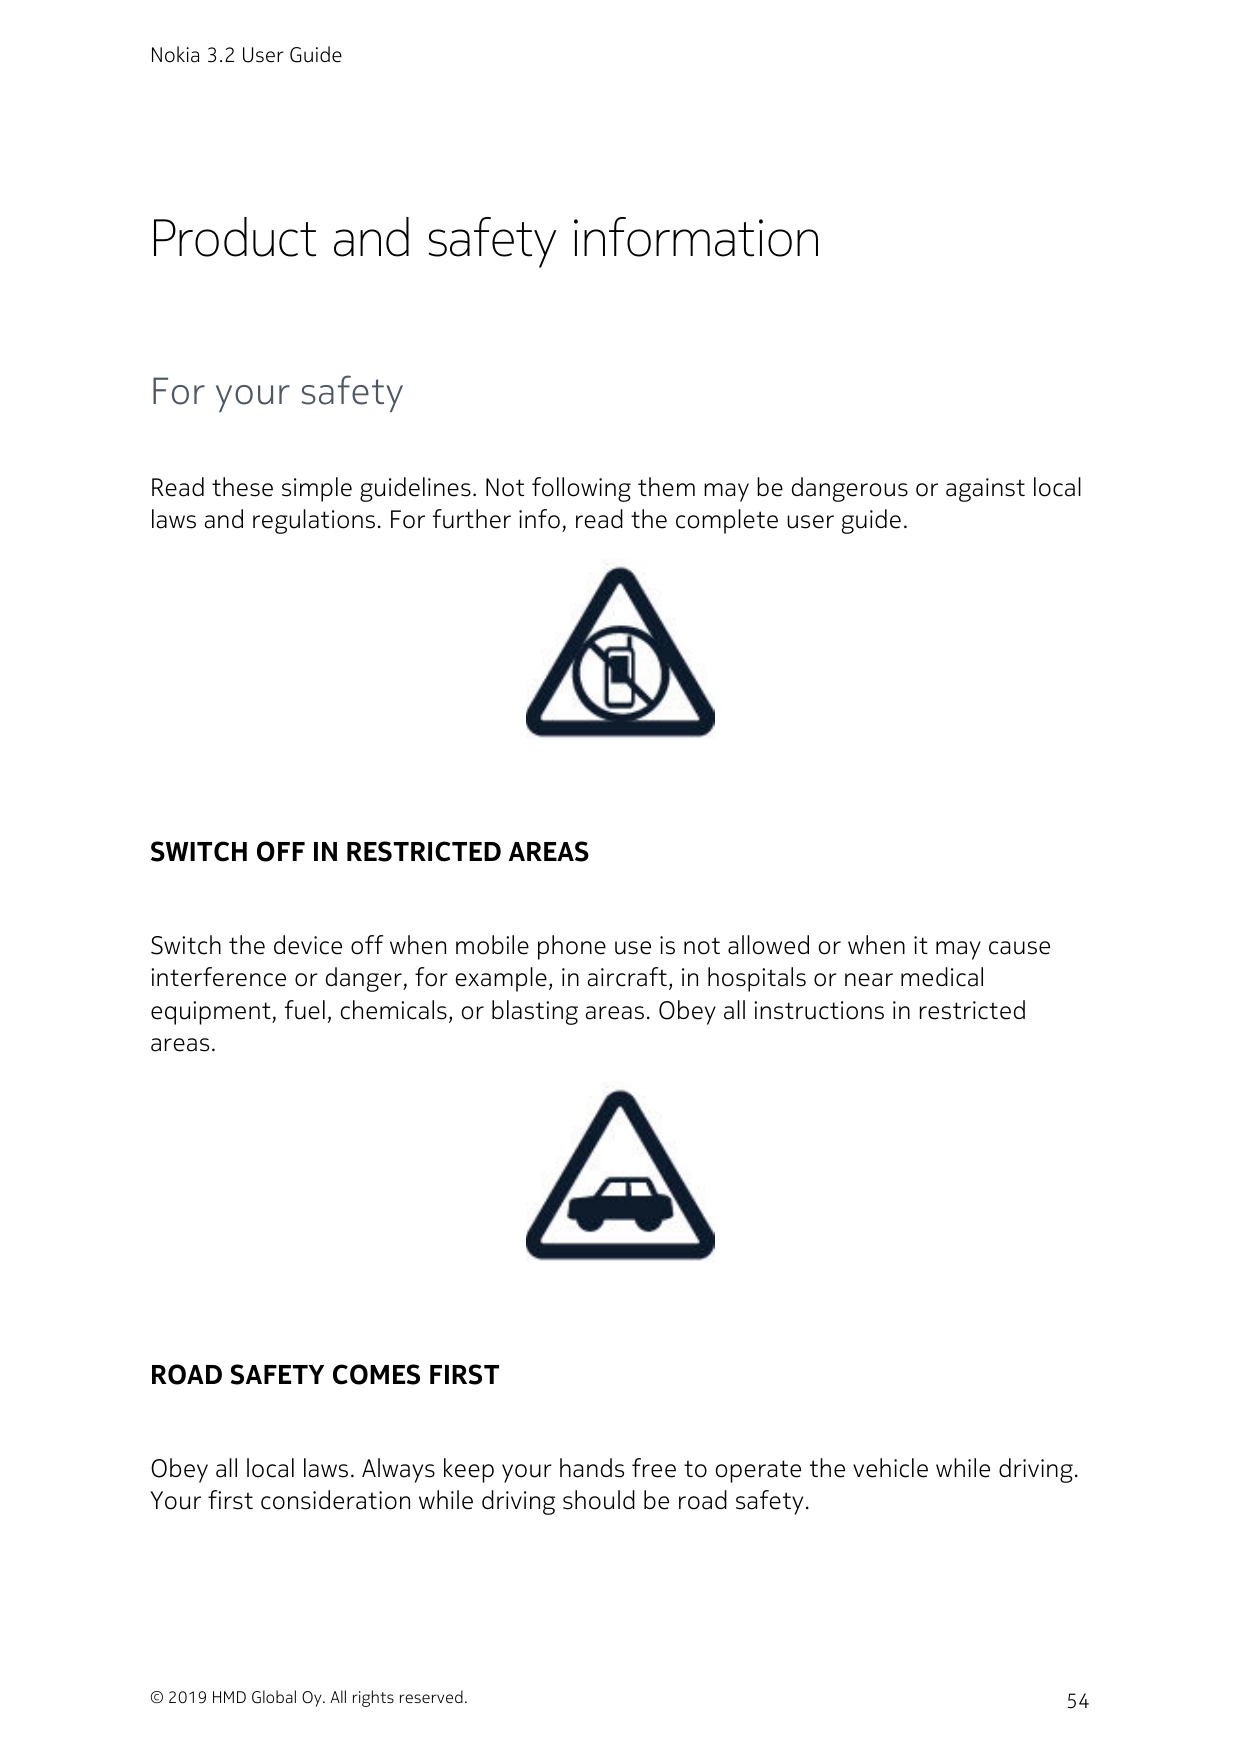 Nokia 3.2 User GuideProduct and safety informationFor your safetyRead these simple guidelines. Not following them may be dangero